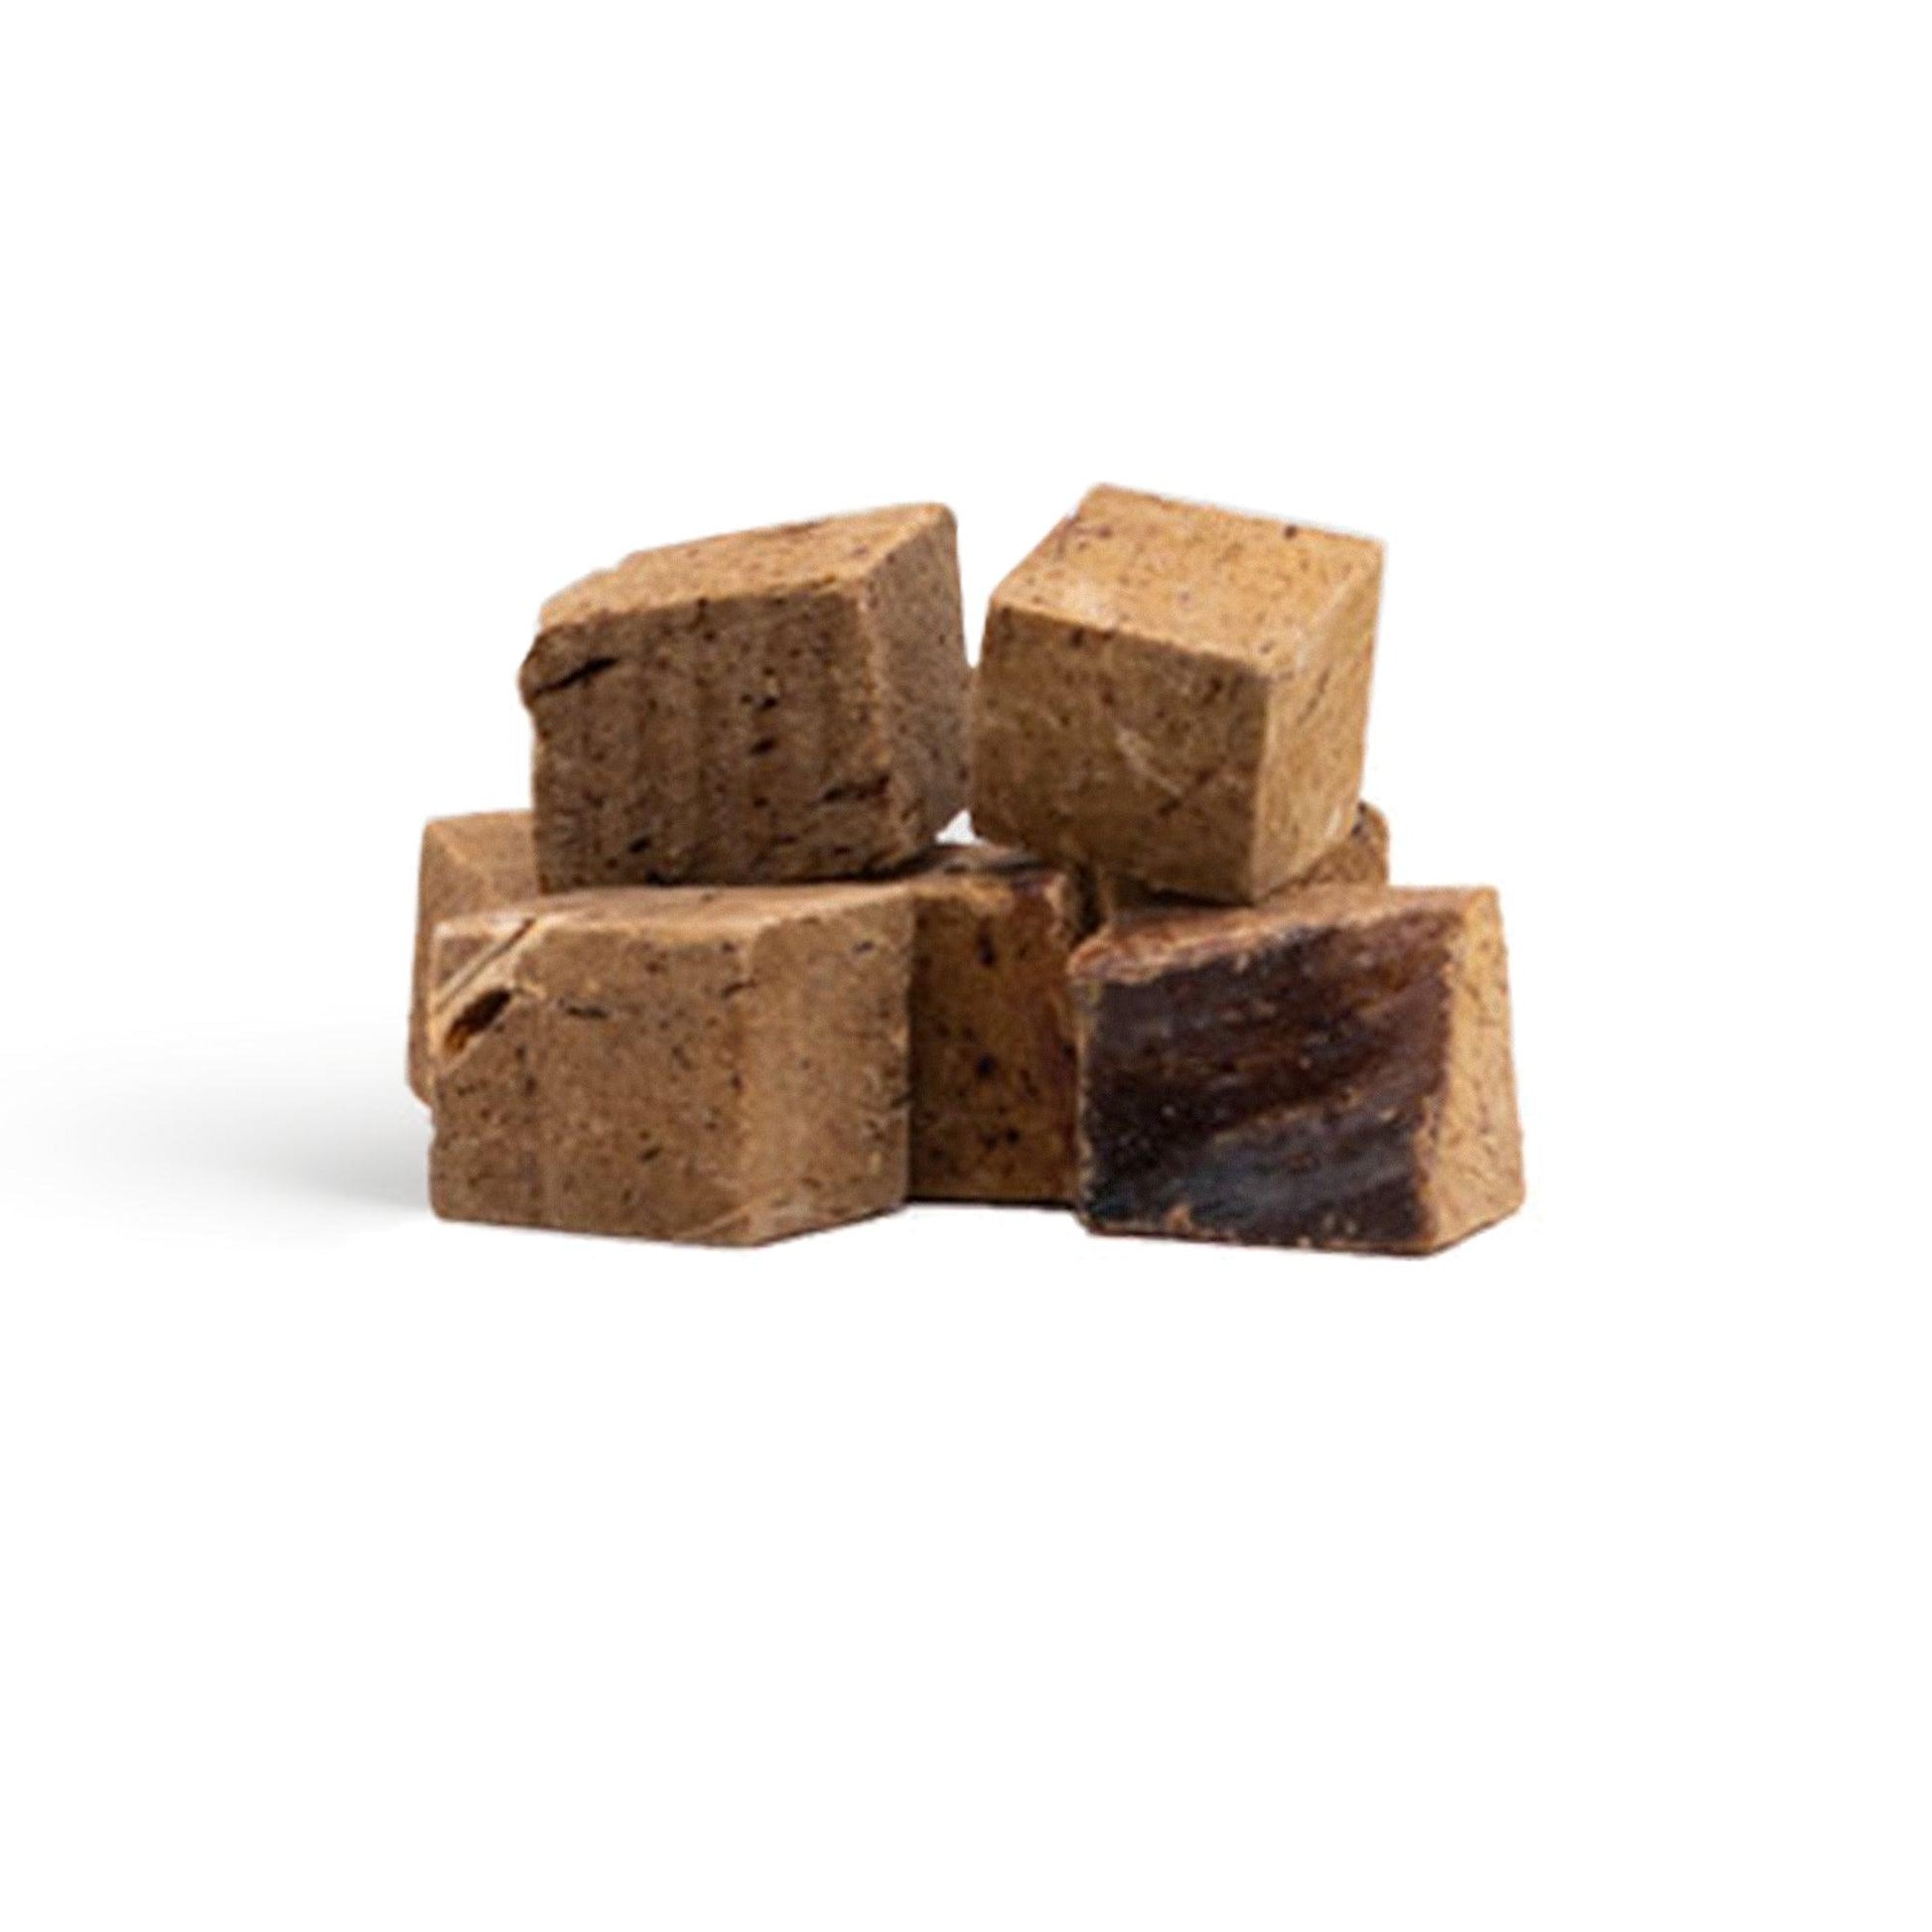 Beef Liver Dog Treats by HOLI - The Hammer Sports